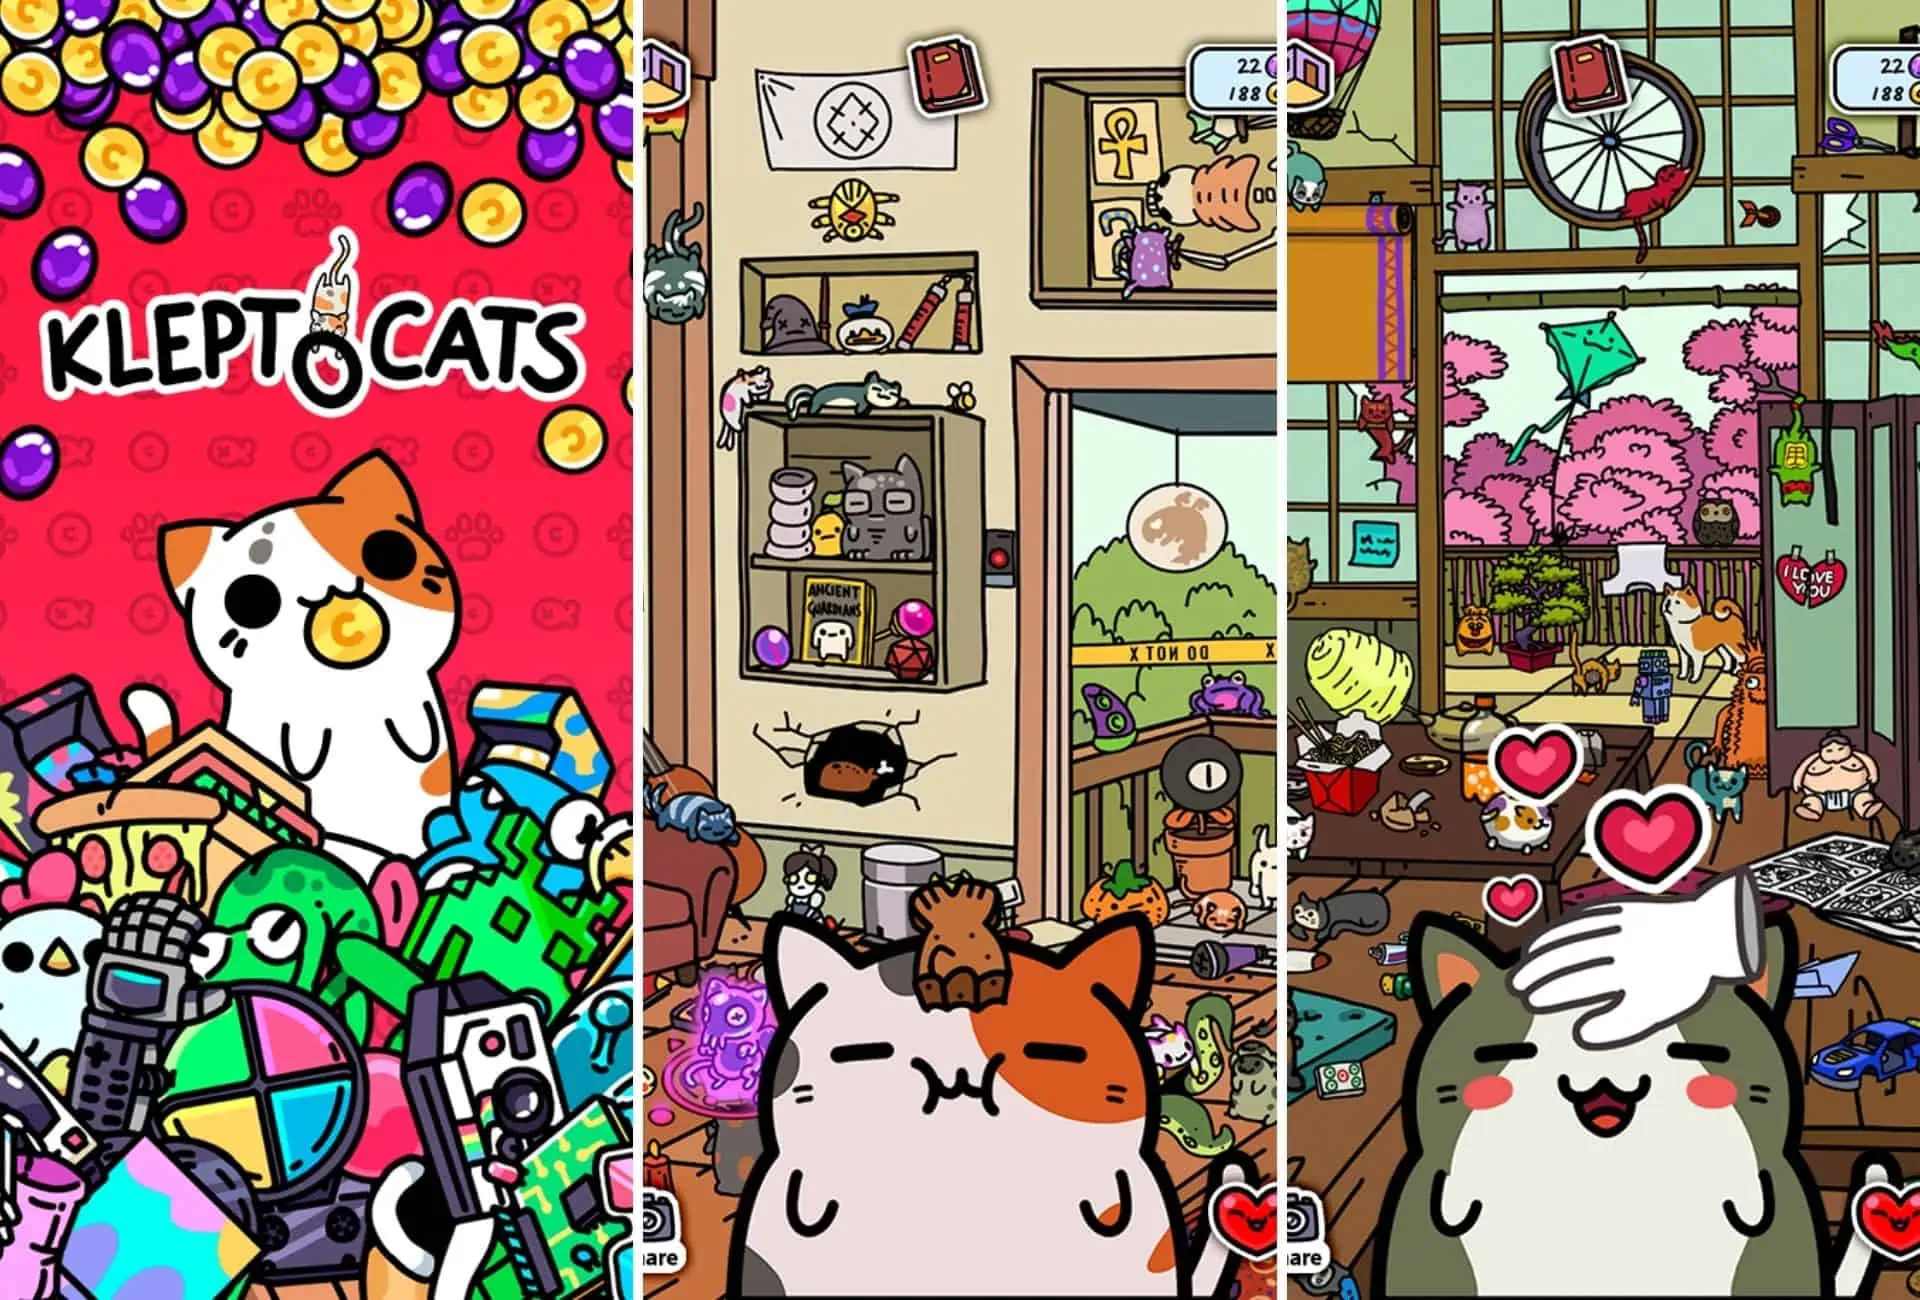 Klepto cats mobile game